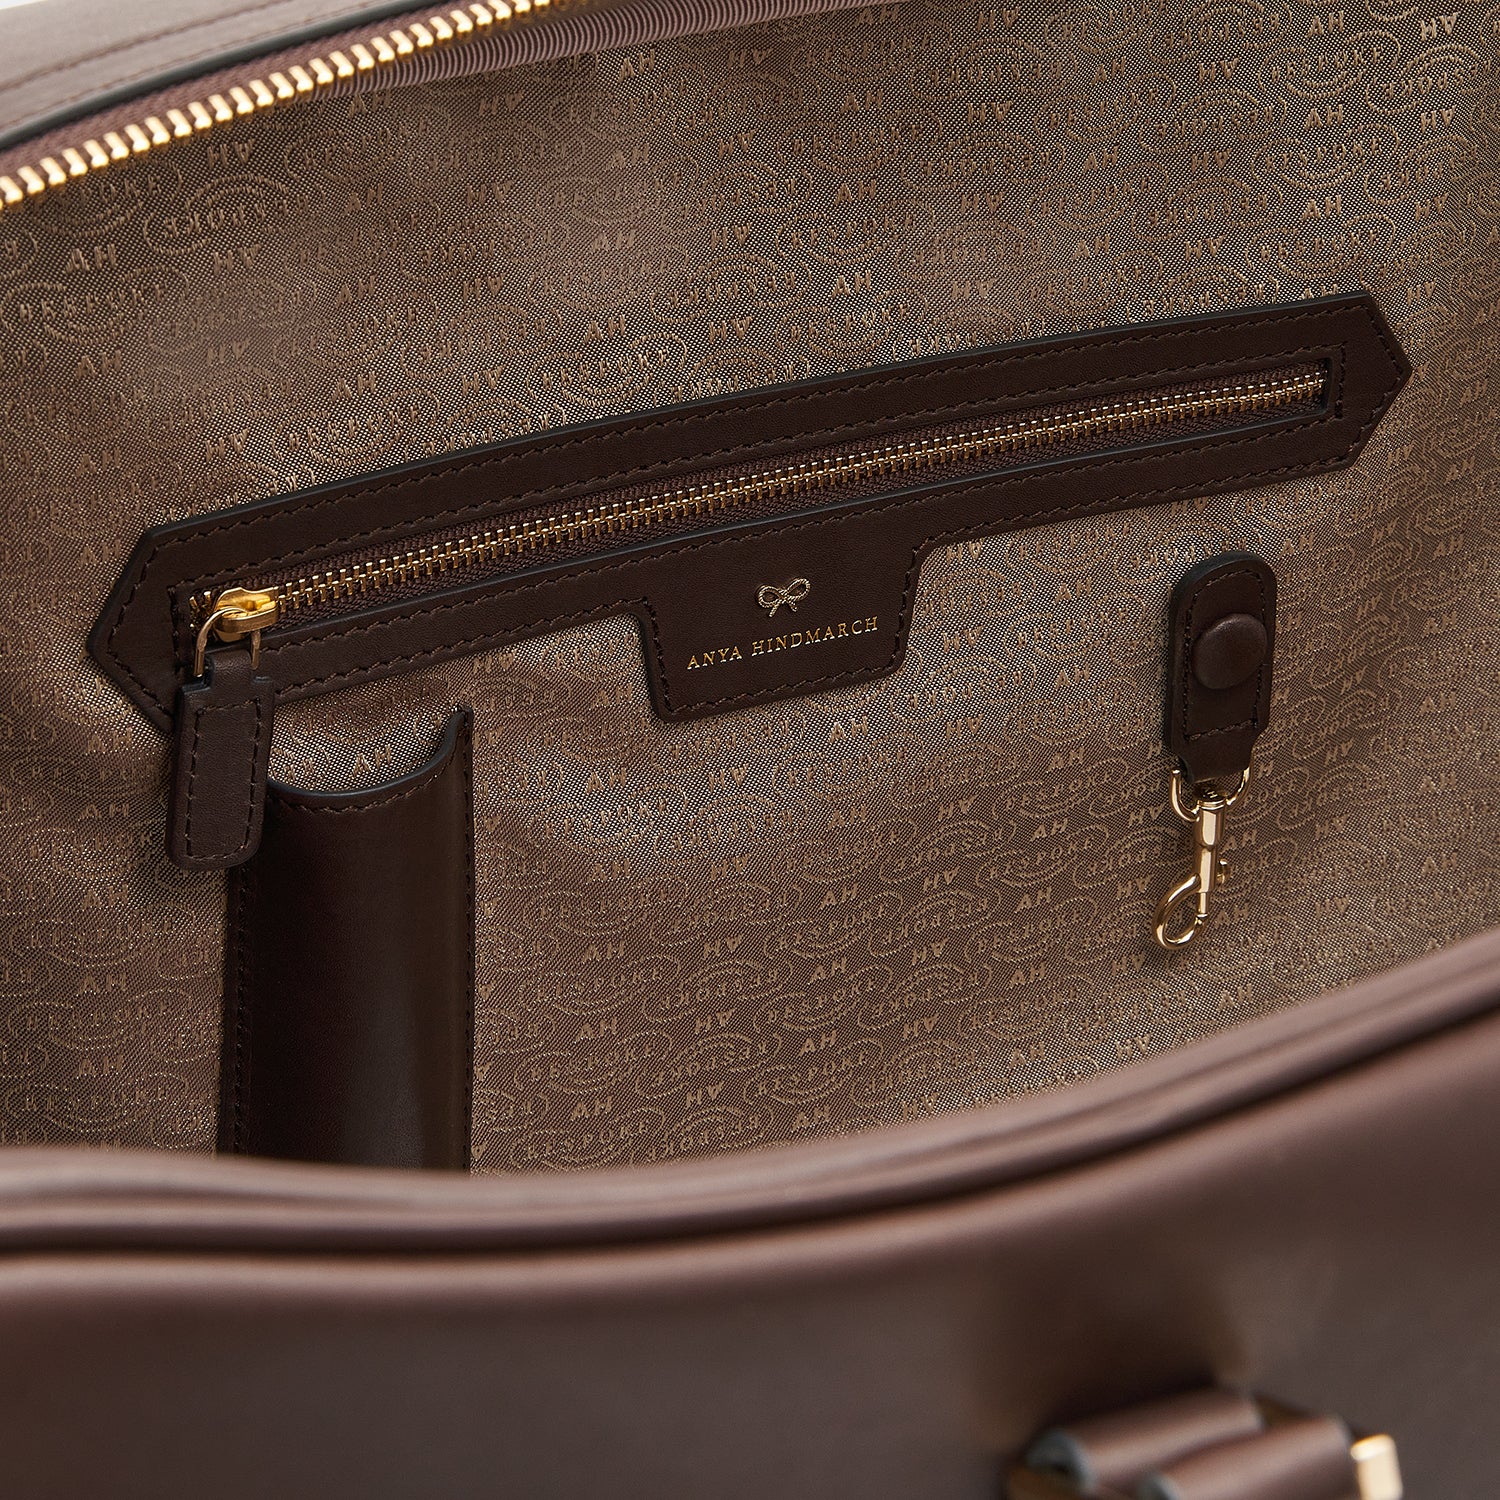 Bespoke Latimer Weekend Bag -

                  
                    Butter Leather in Chocolate -
                  

                  Anya Hindmarch UK
